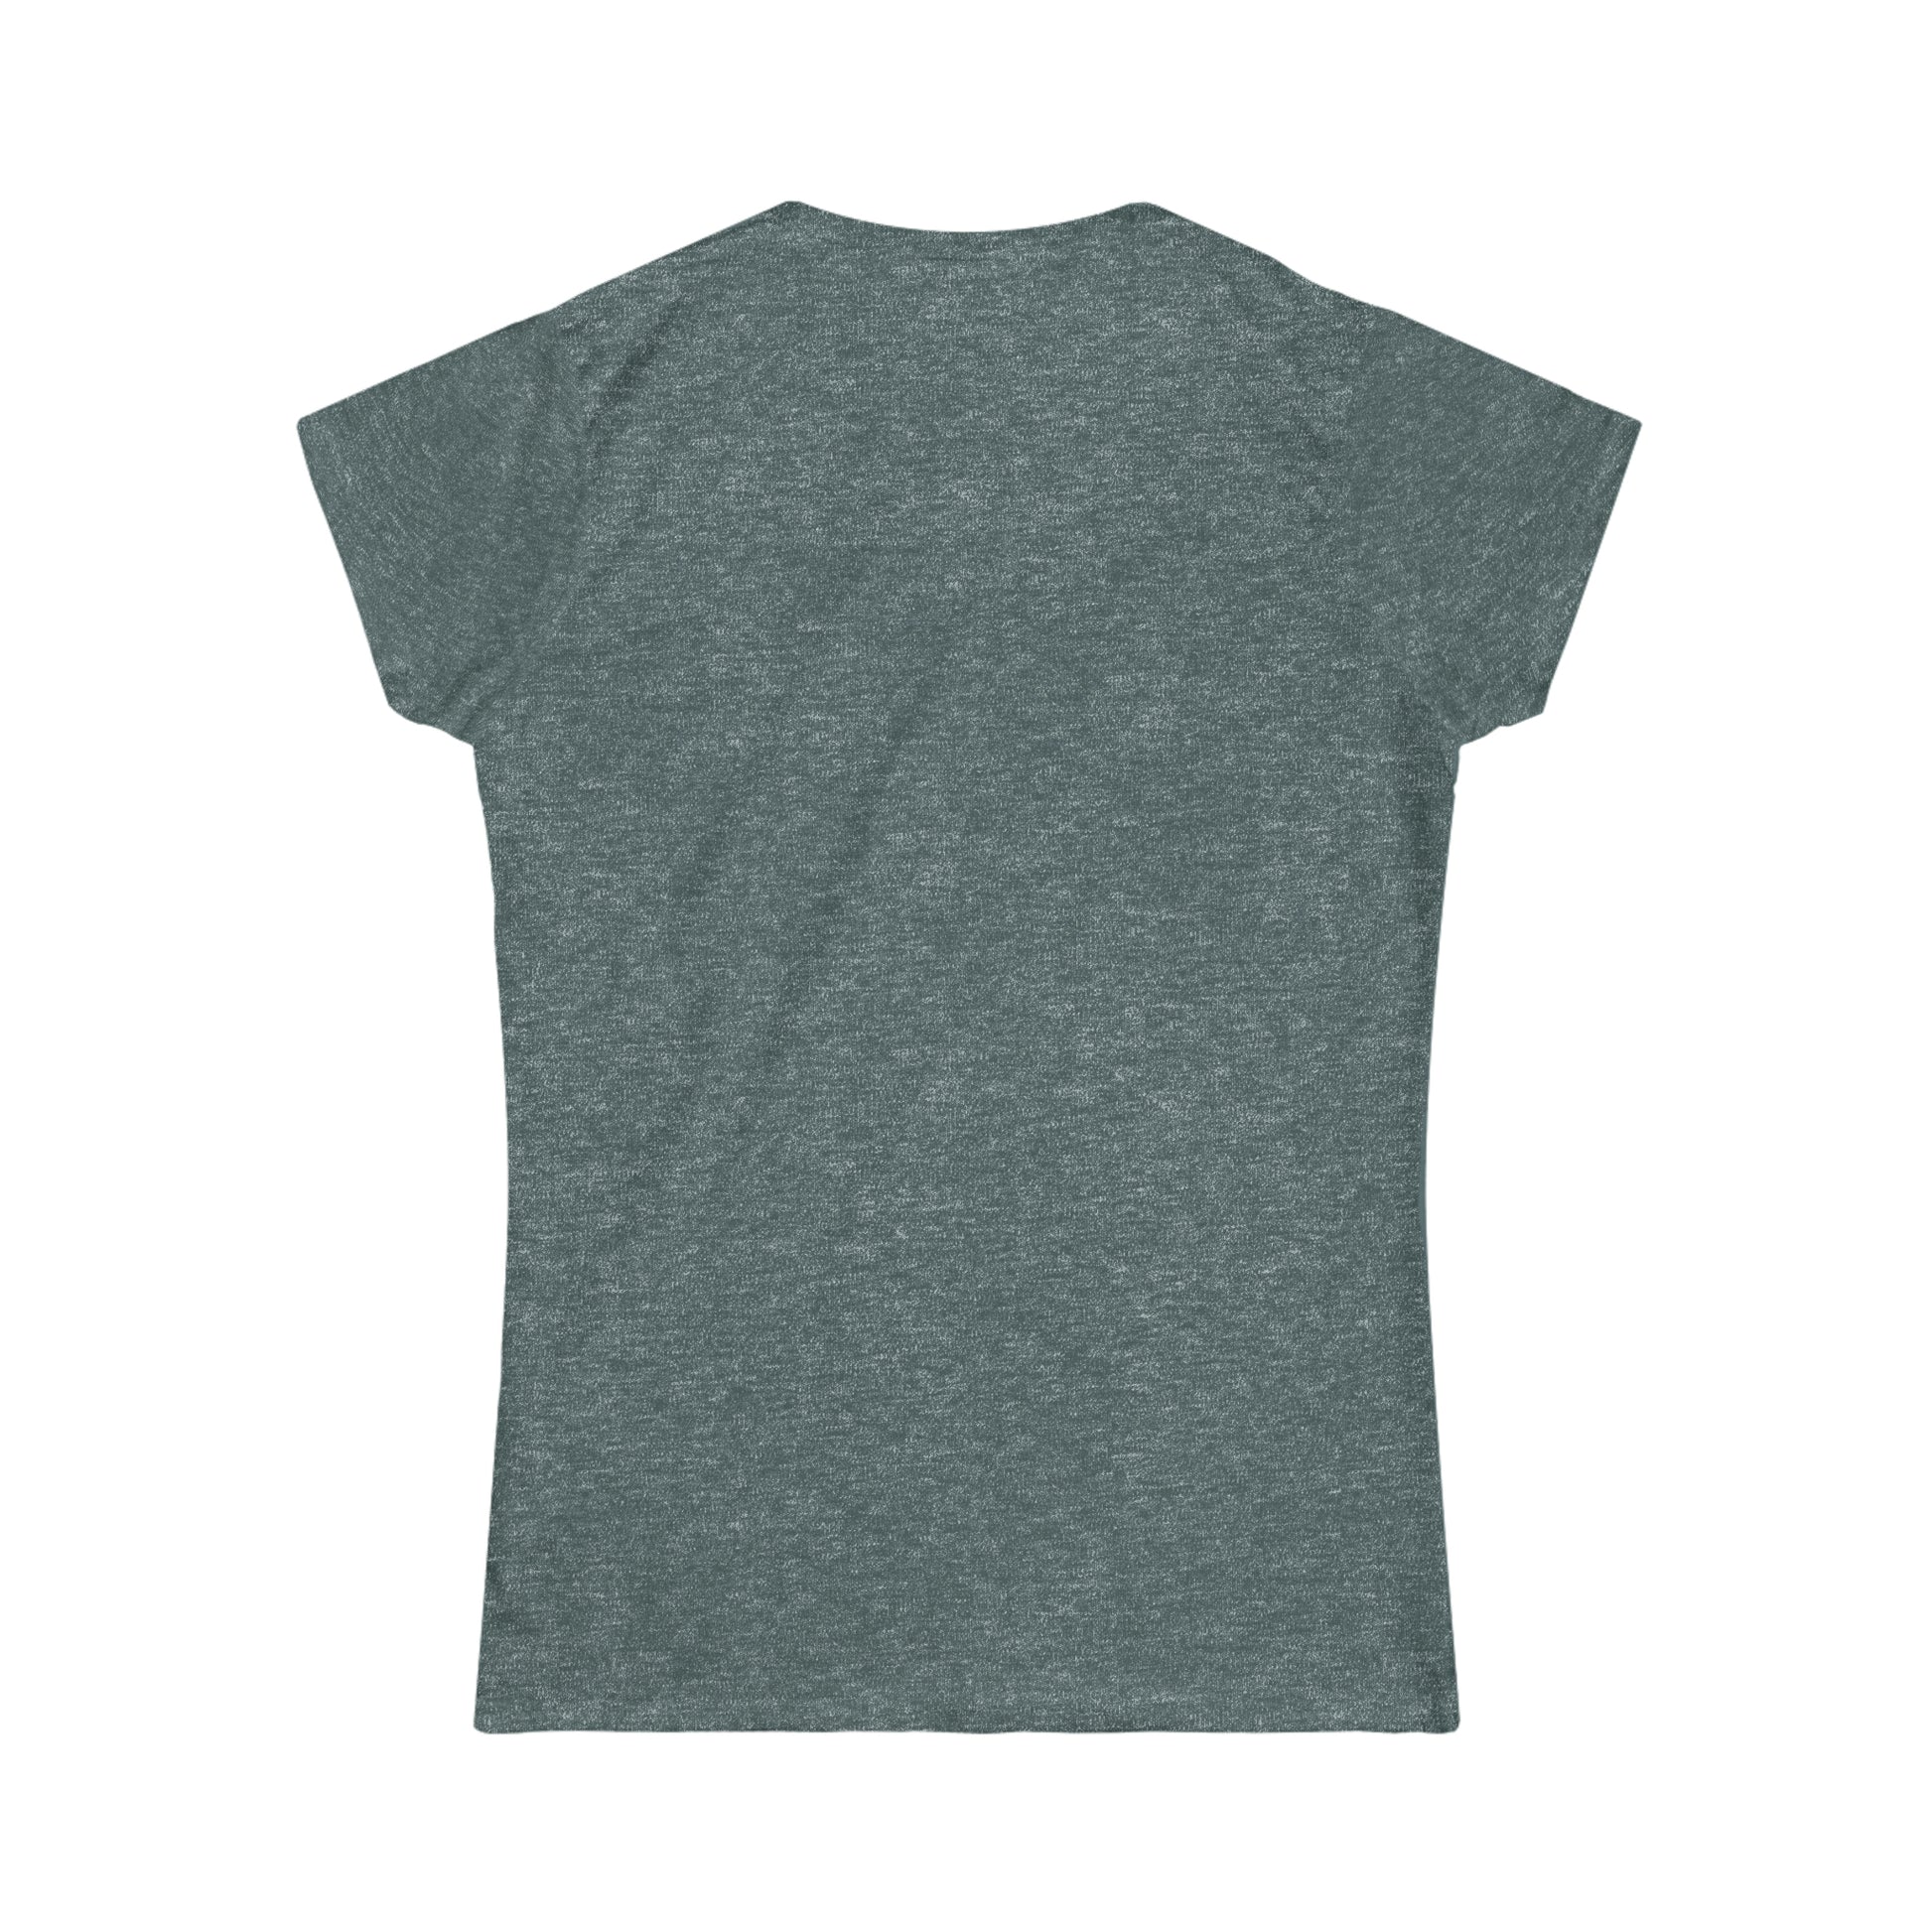 River Bear Women's Softstyle Tee - 907Outdoors